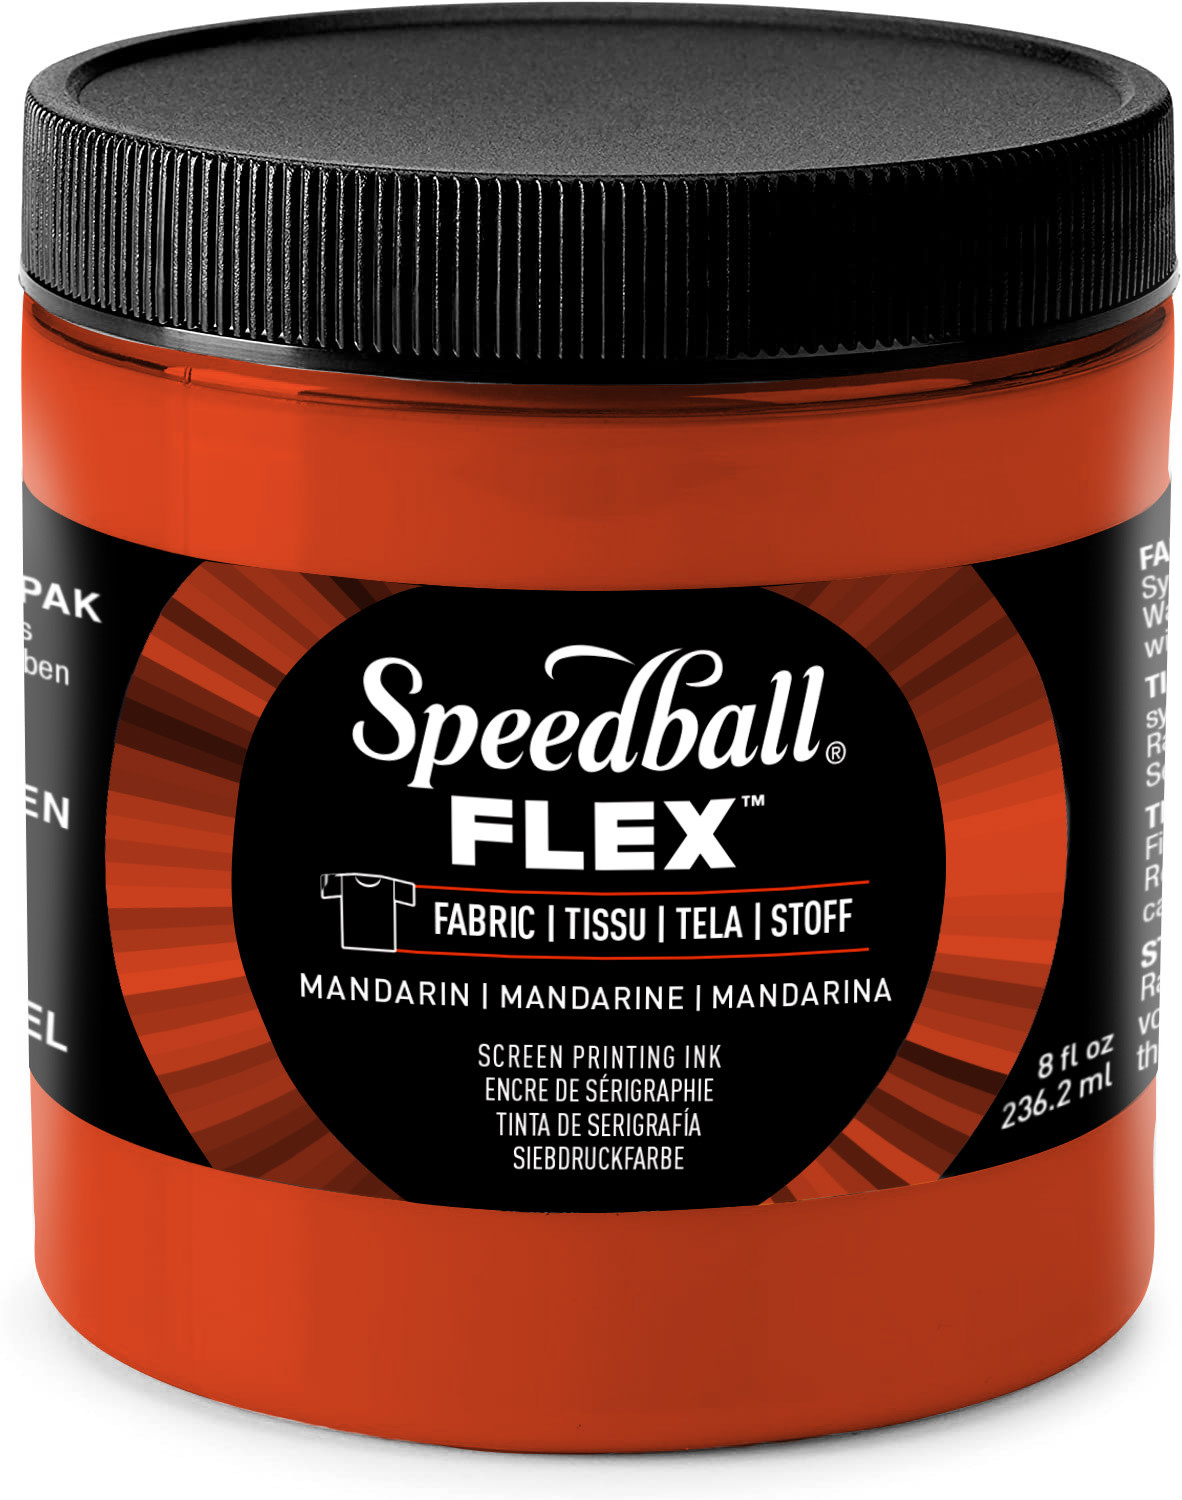 Speedball Water-Soluble Block Printing Ink, Red, 8oz - The Art  Store/Commercial Art Supply